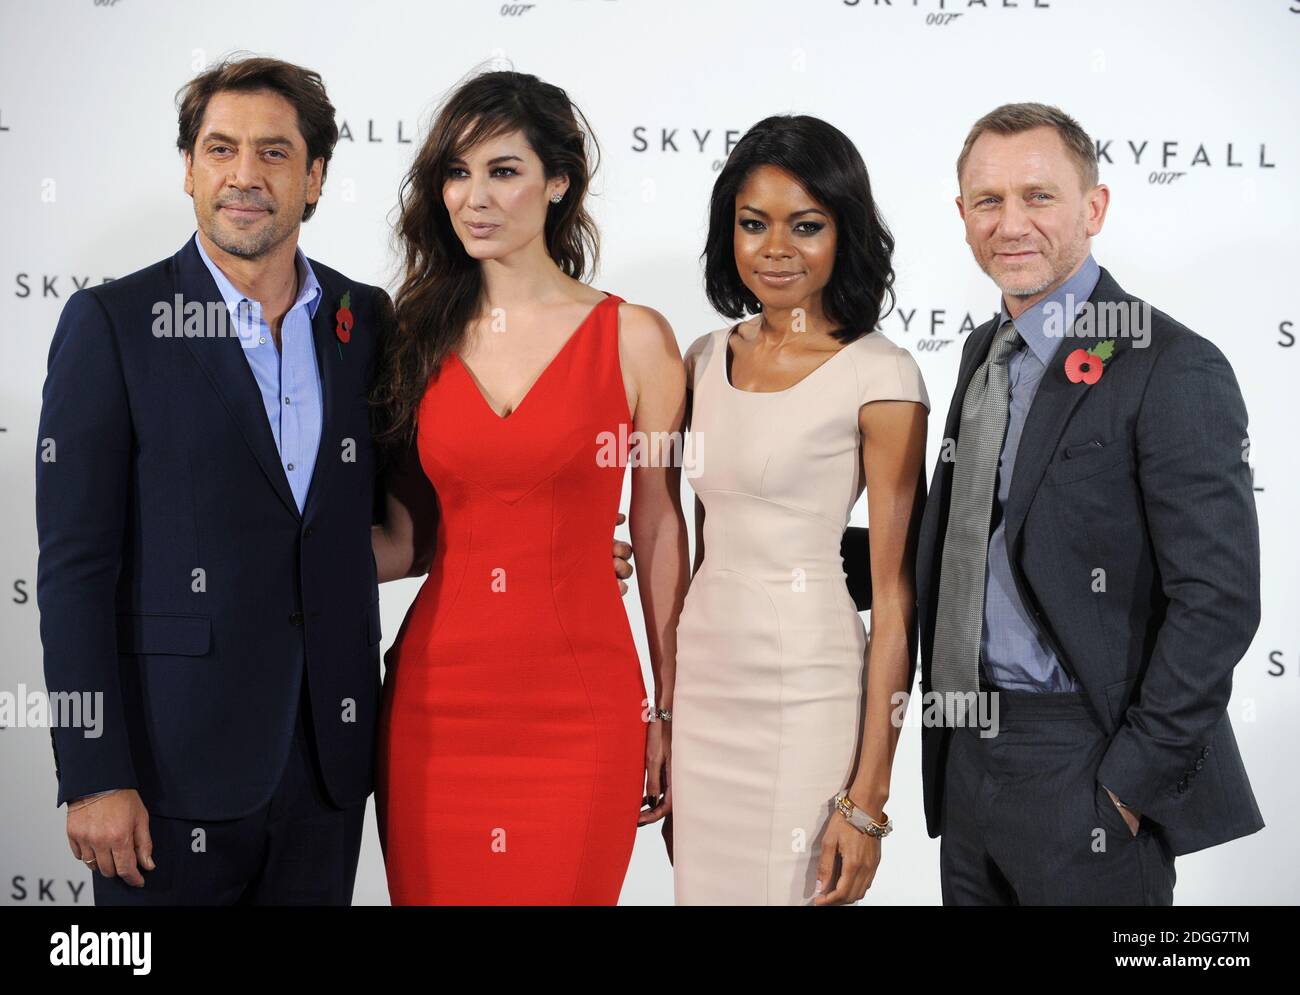 (Left to right) Javier Bardem, Berenice Marlohe, Daniel Craig and Naomie Harris at a photocall for the new James Bond film Skyfall, in London. Stock Photo